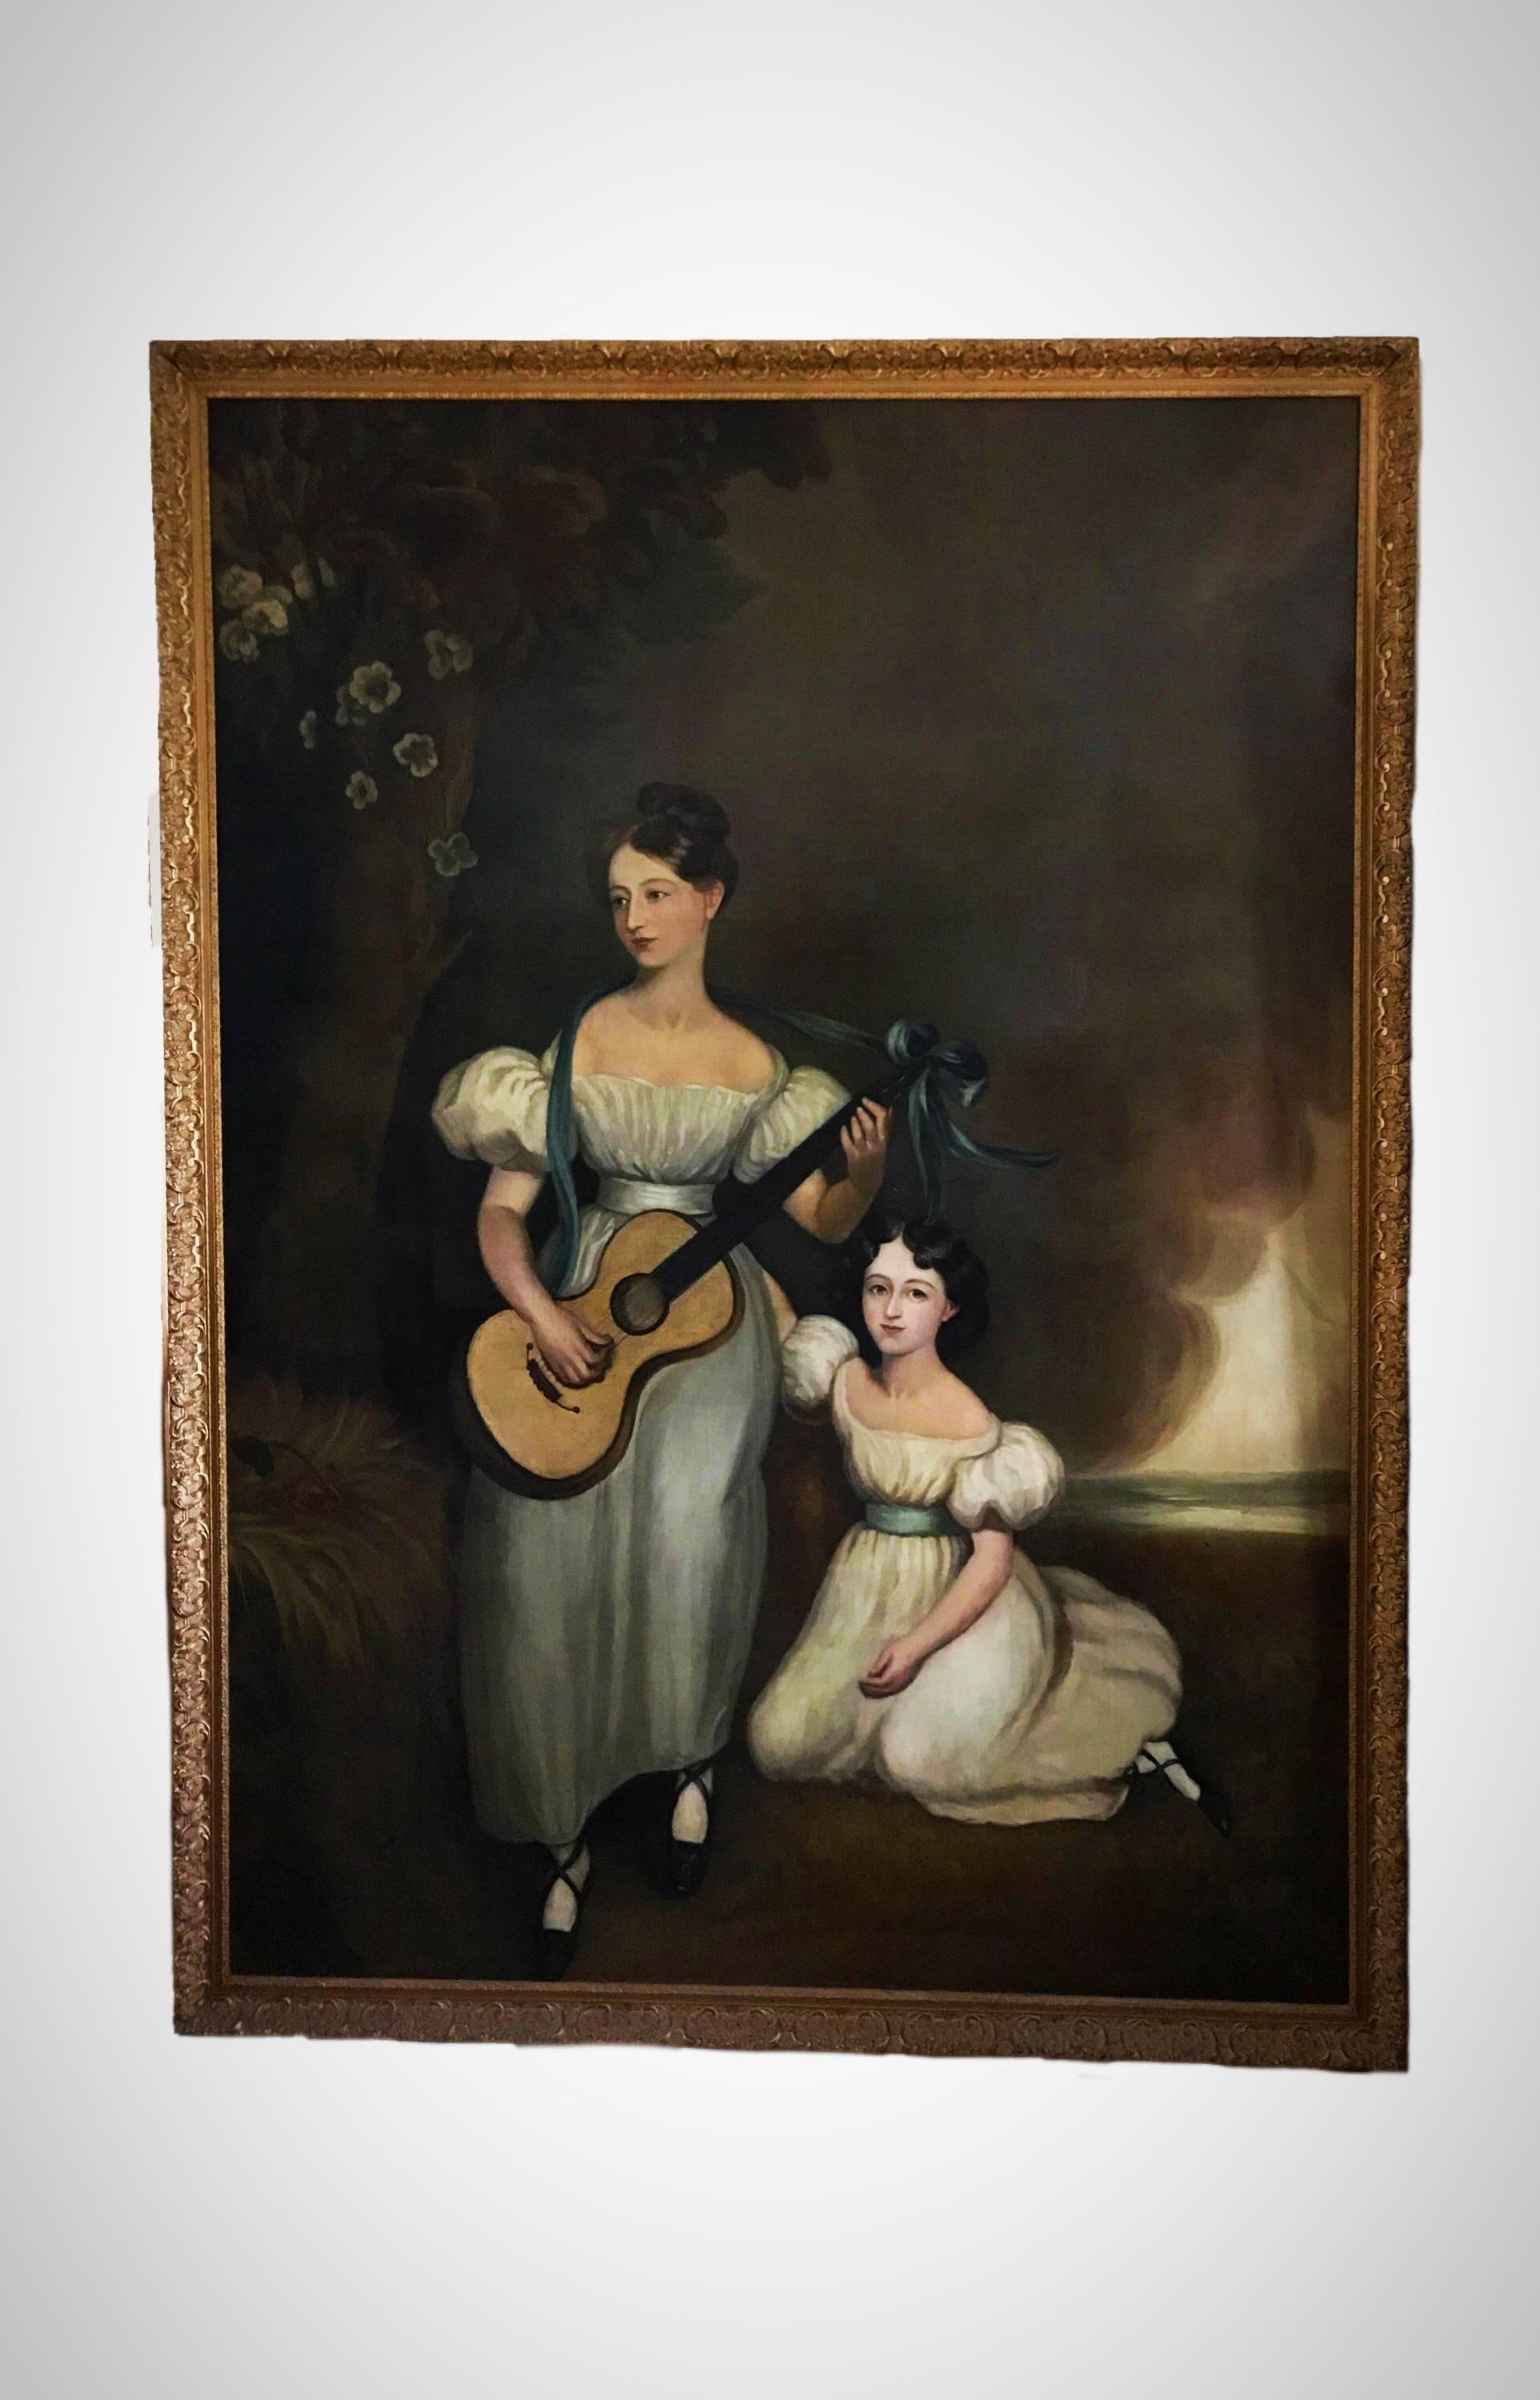 (Please refer to Spencelayhs of Cambridgeshire’s 1stdibs storefront for singular works) 

A very rare opportunity to obtain three full size family portraits of the renowned Chandos-Pole family of Radbourne Hall, England.

These paintings would have